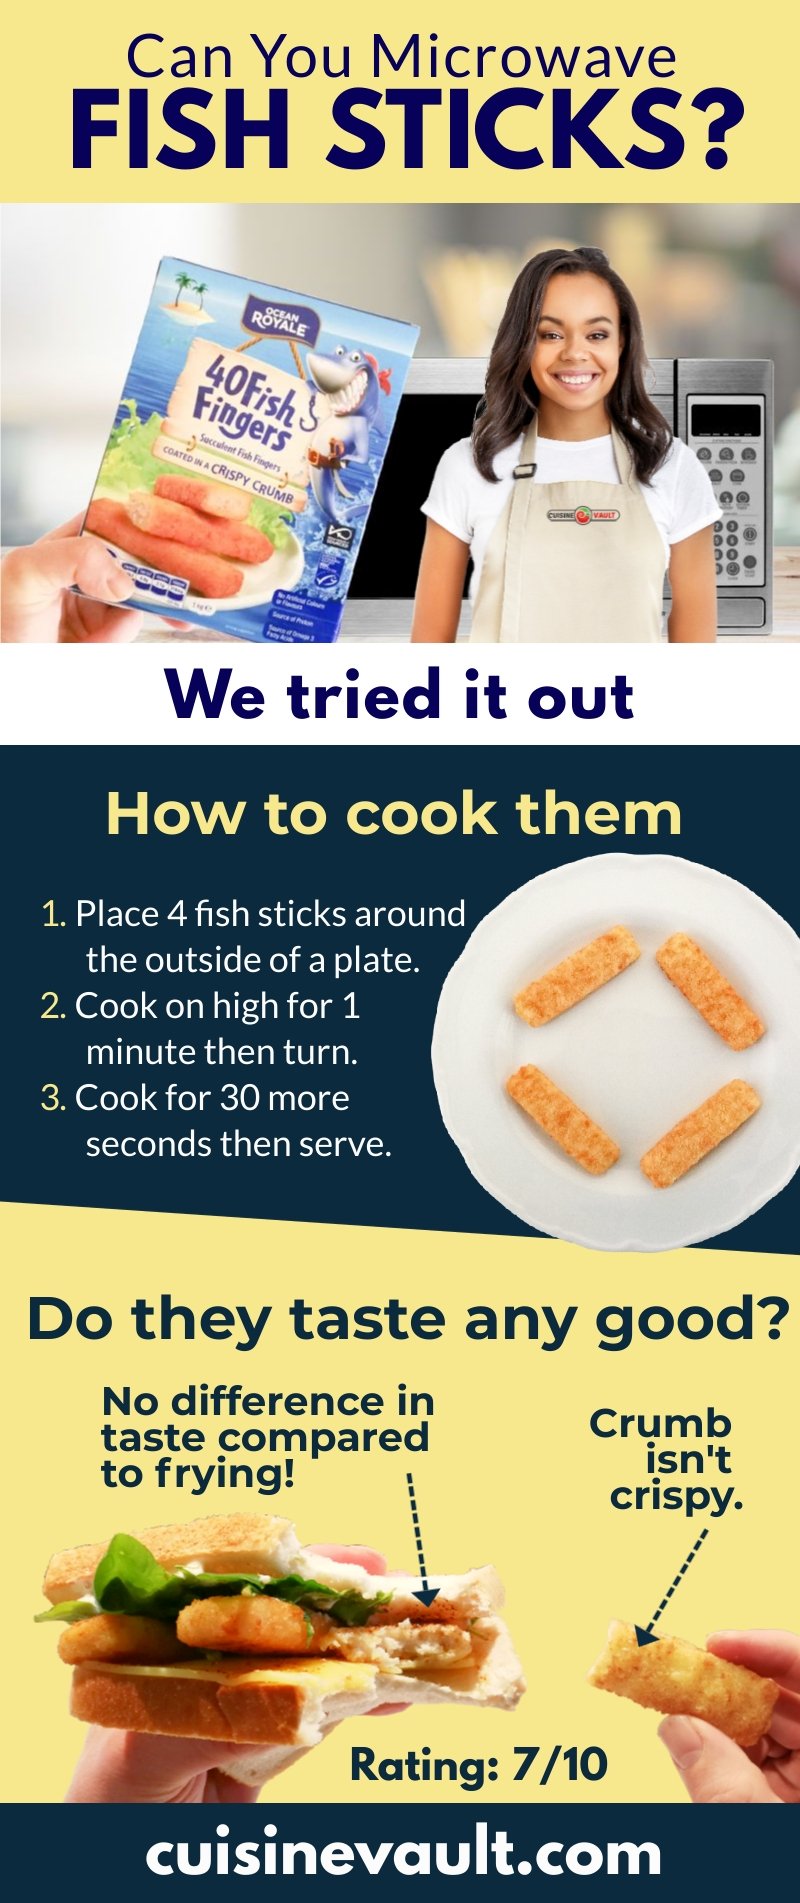 Infographic about microwaving fish sticks